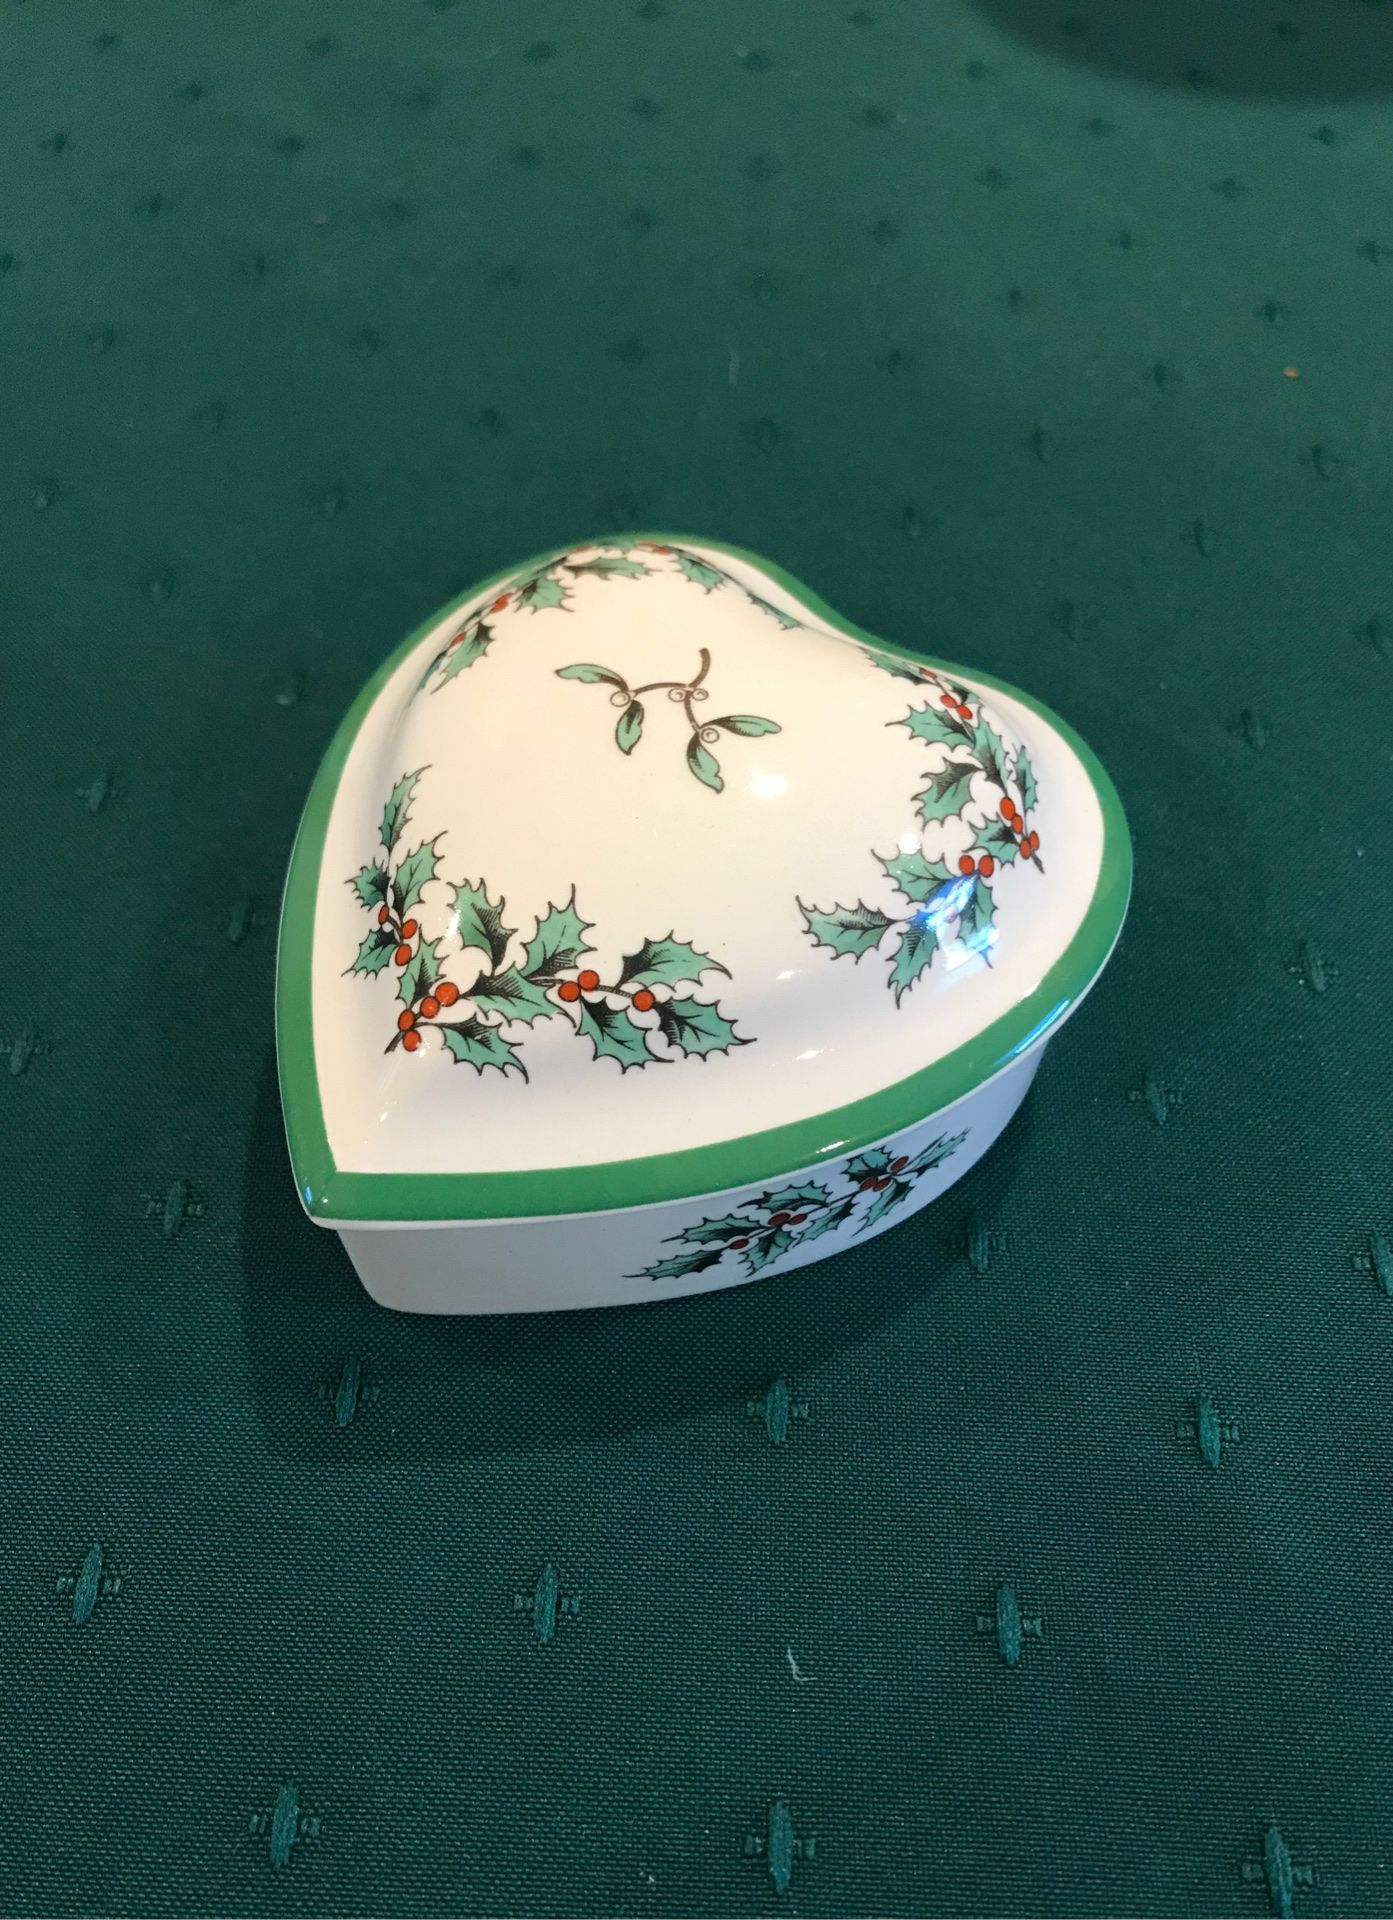 Spode covered candy/jewelry dish